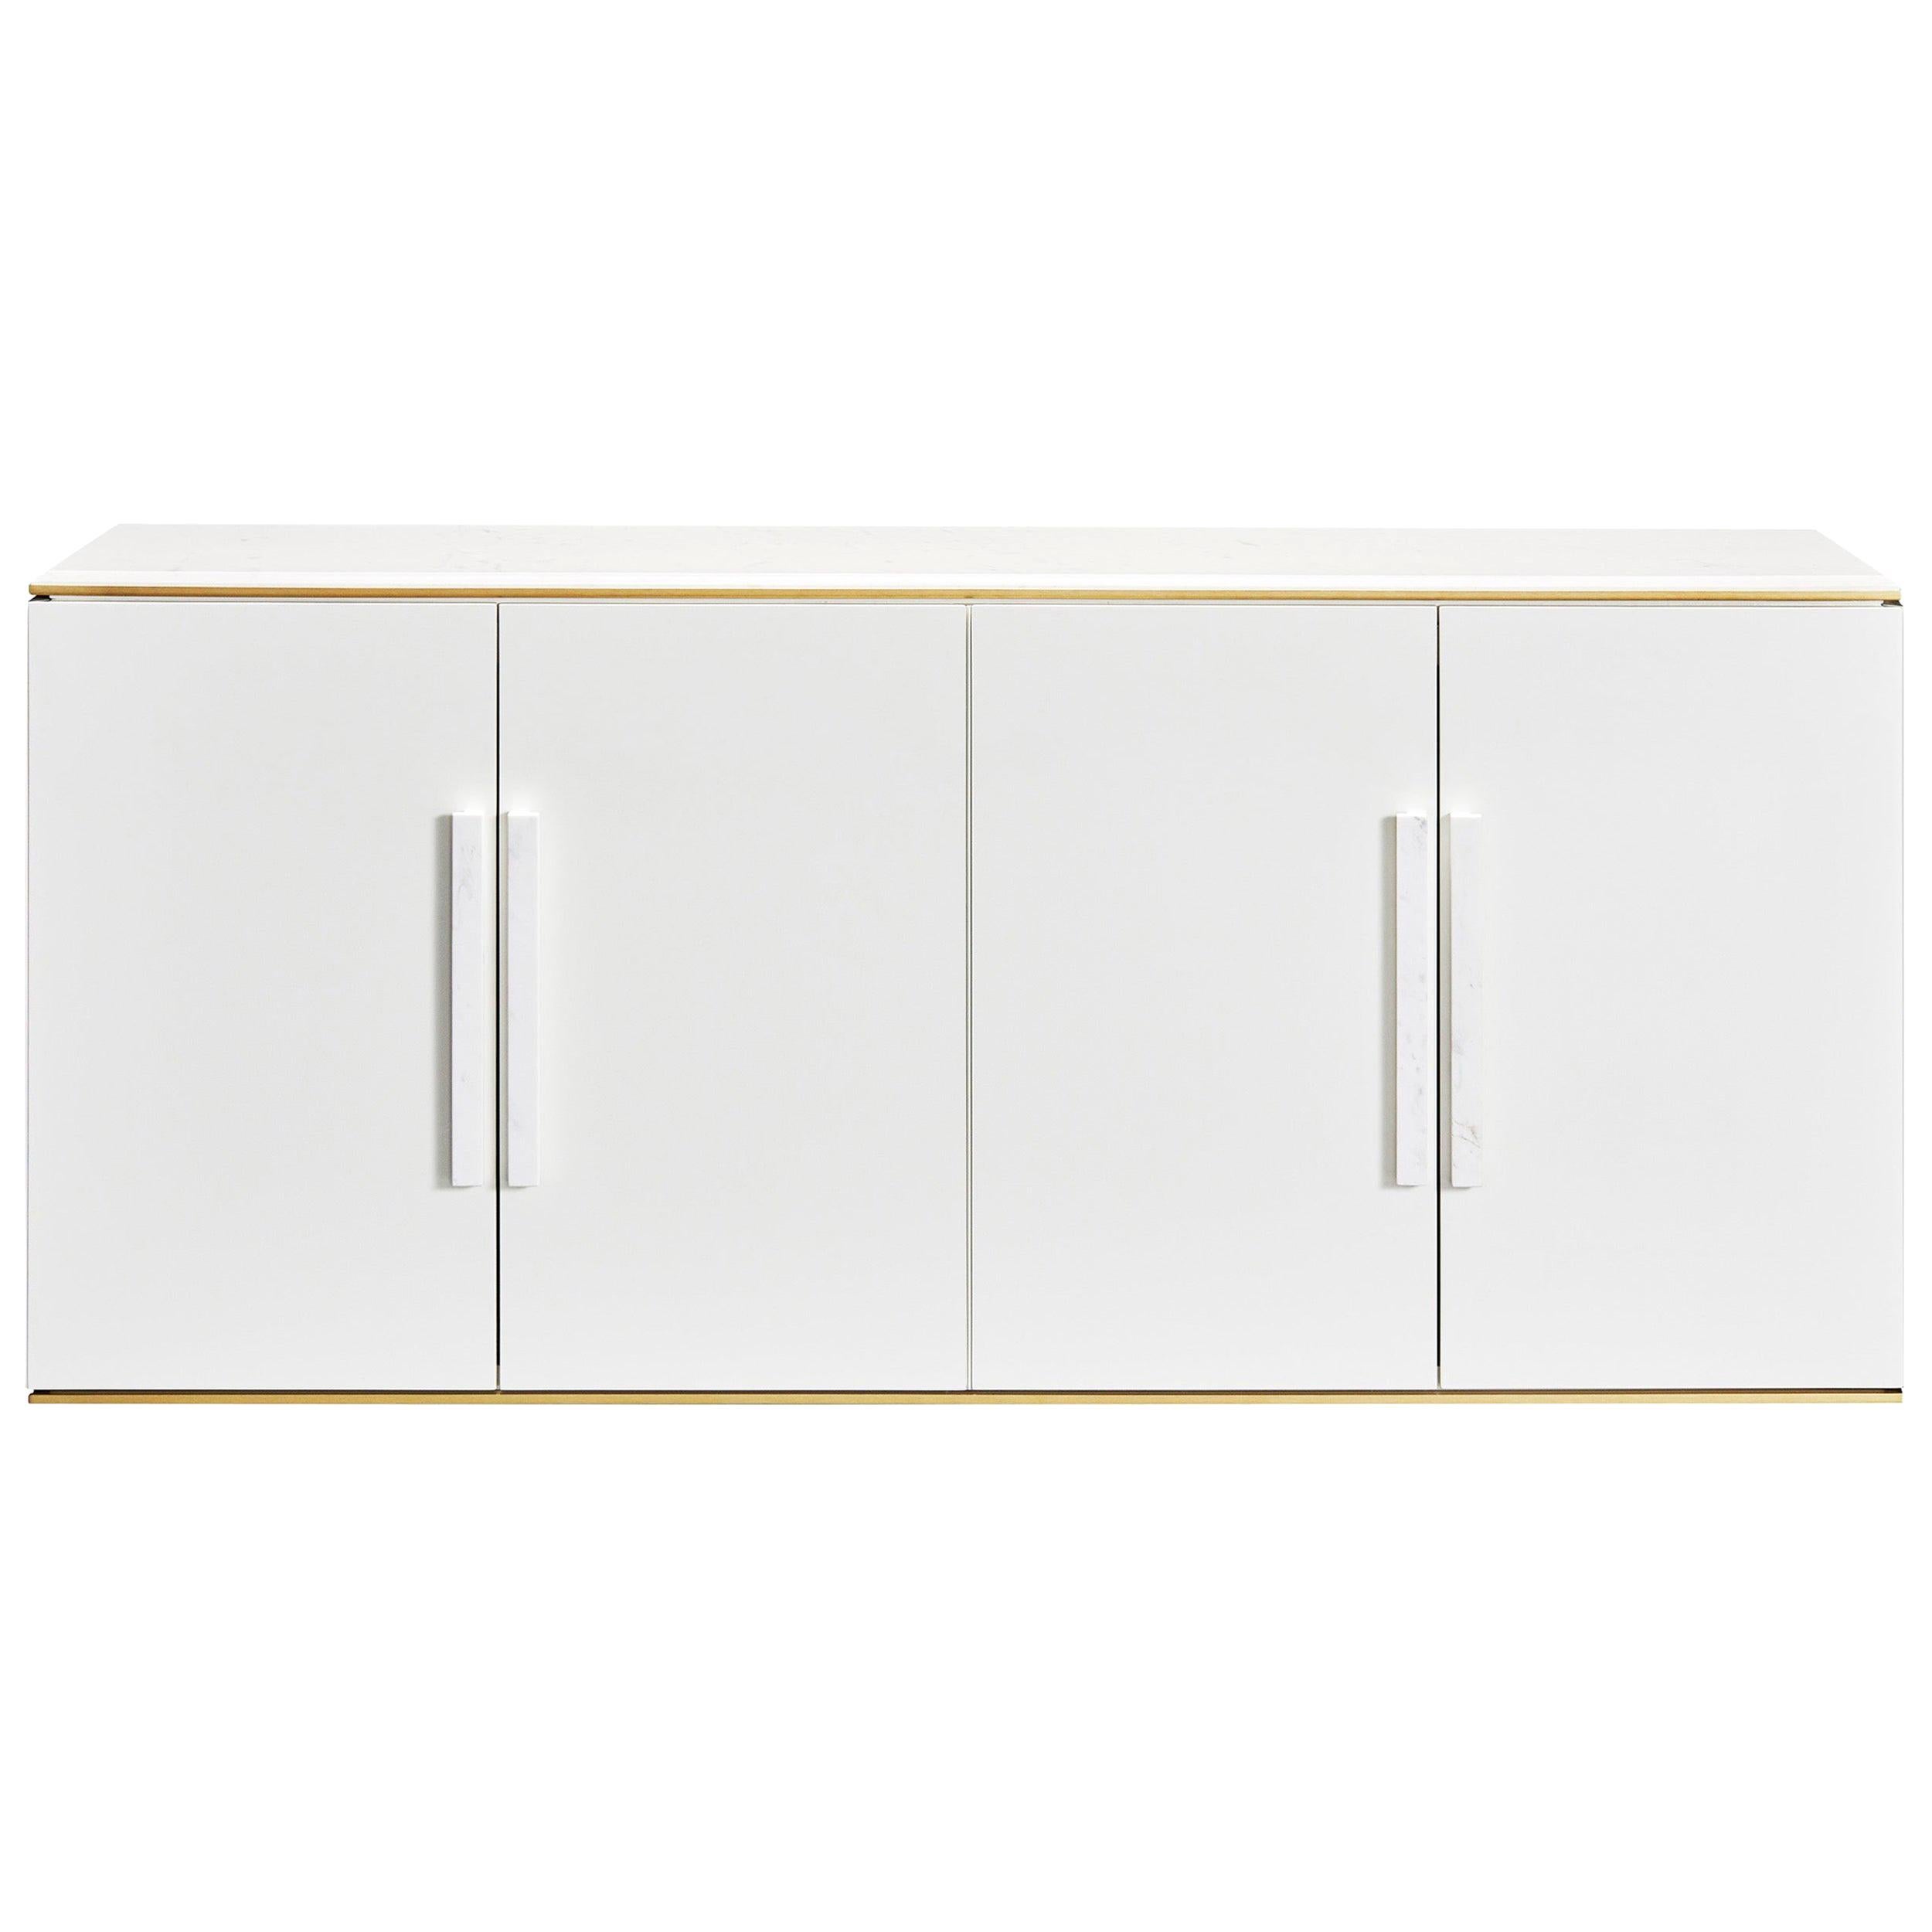 Infante II sideboard with Olympic White marble top and handles